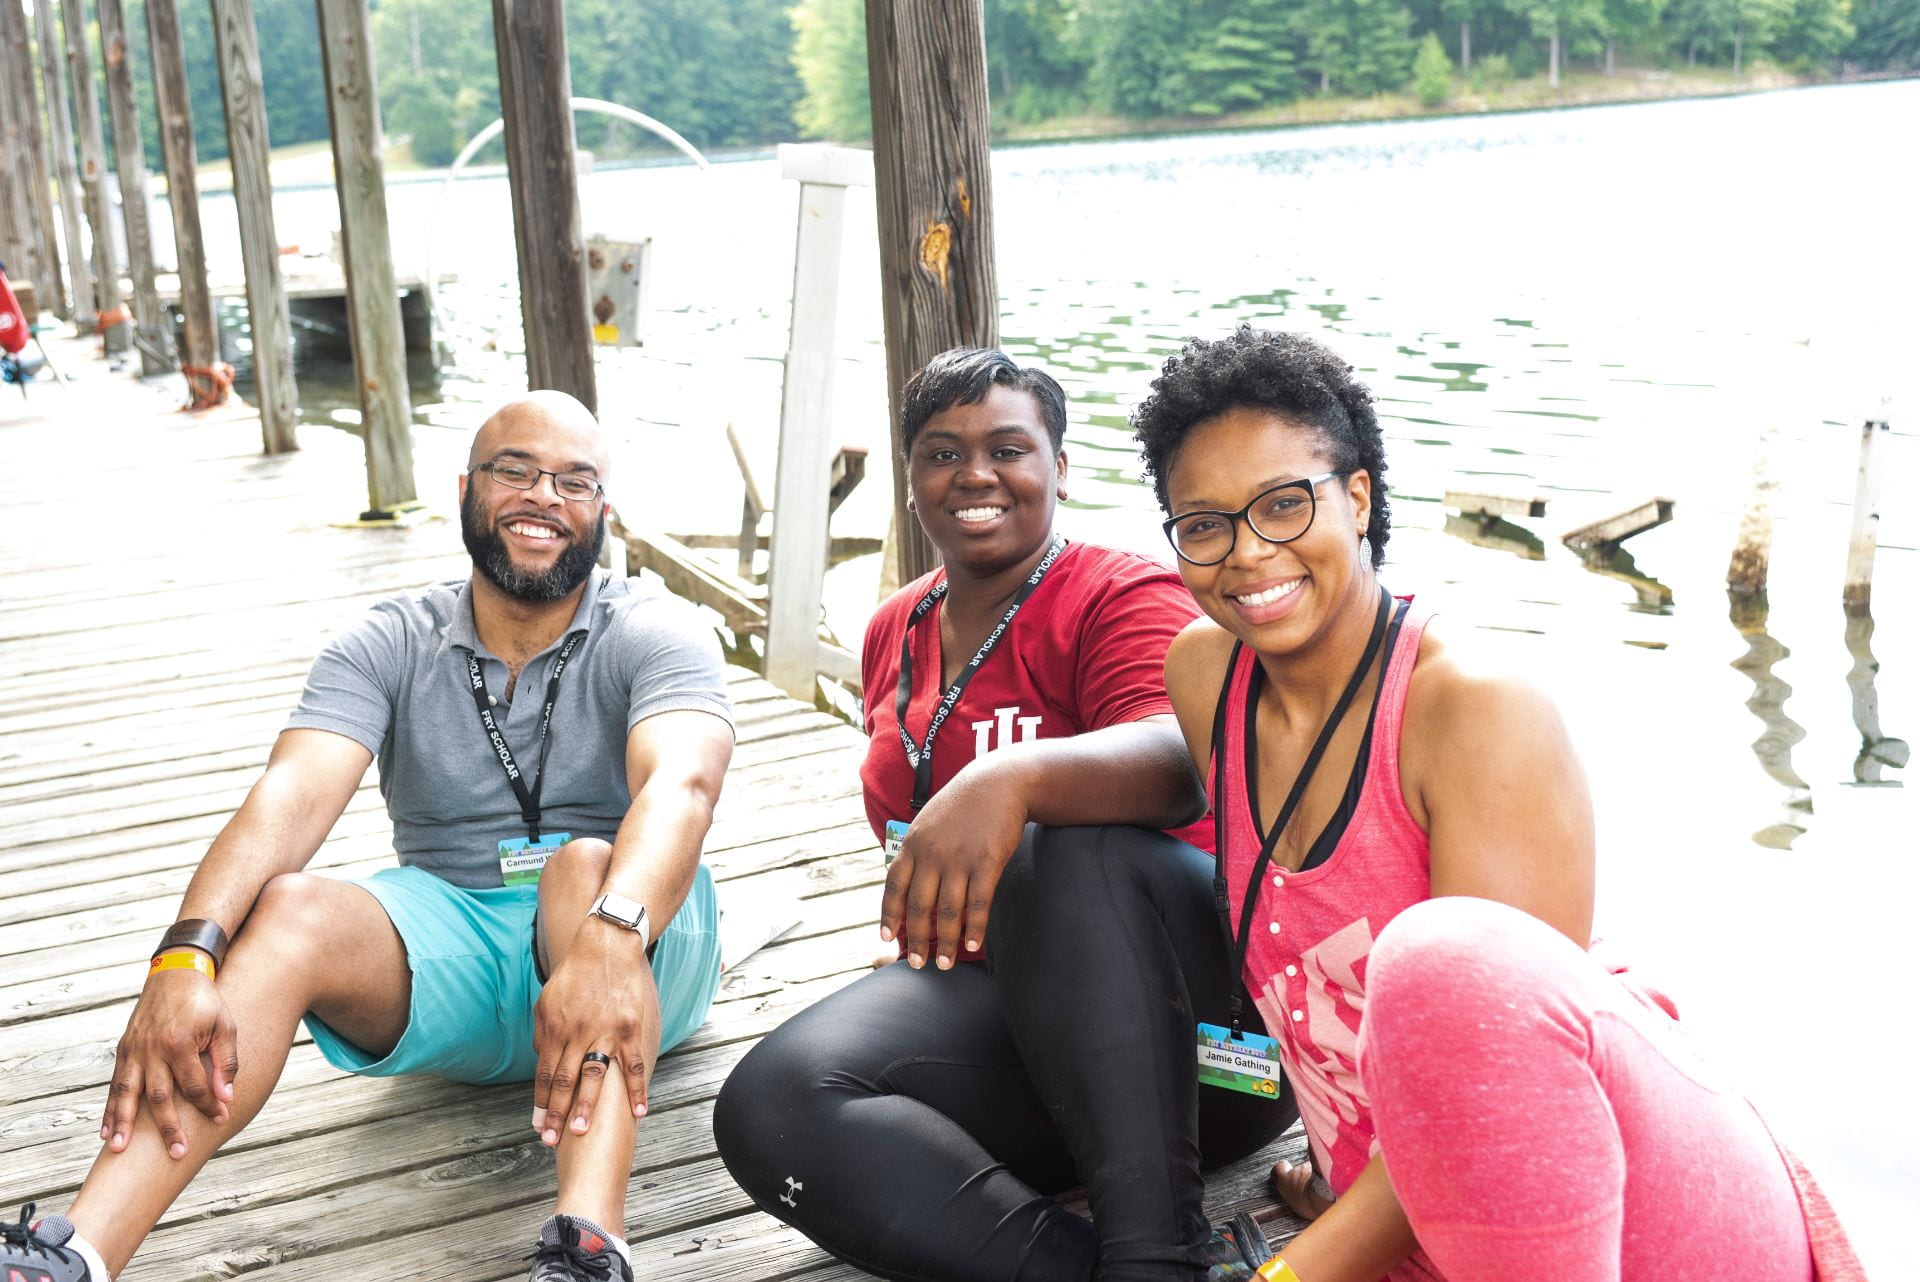 KODI advisors Carmund White, Maqubè Reese, and Jamie Gathing sit on a dock with water in the background.